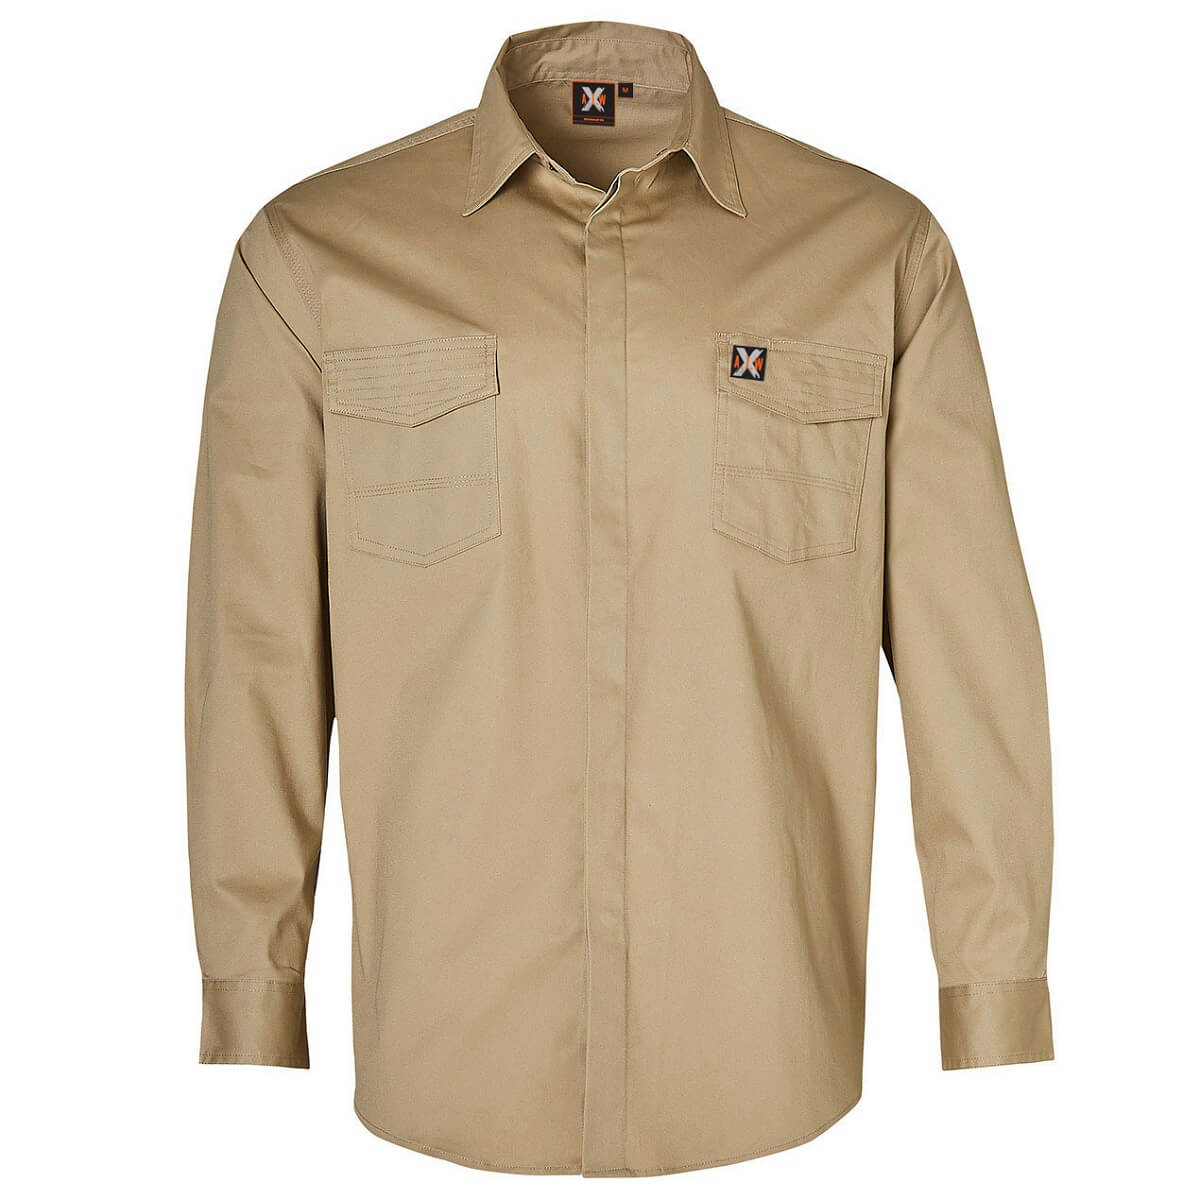 WT10 - Urban Stretch Work Shirt With Double Flap Pockets